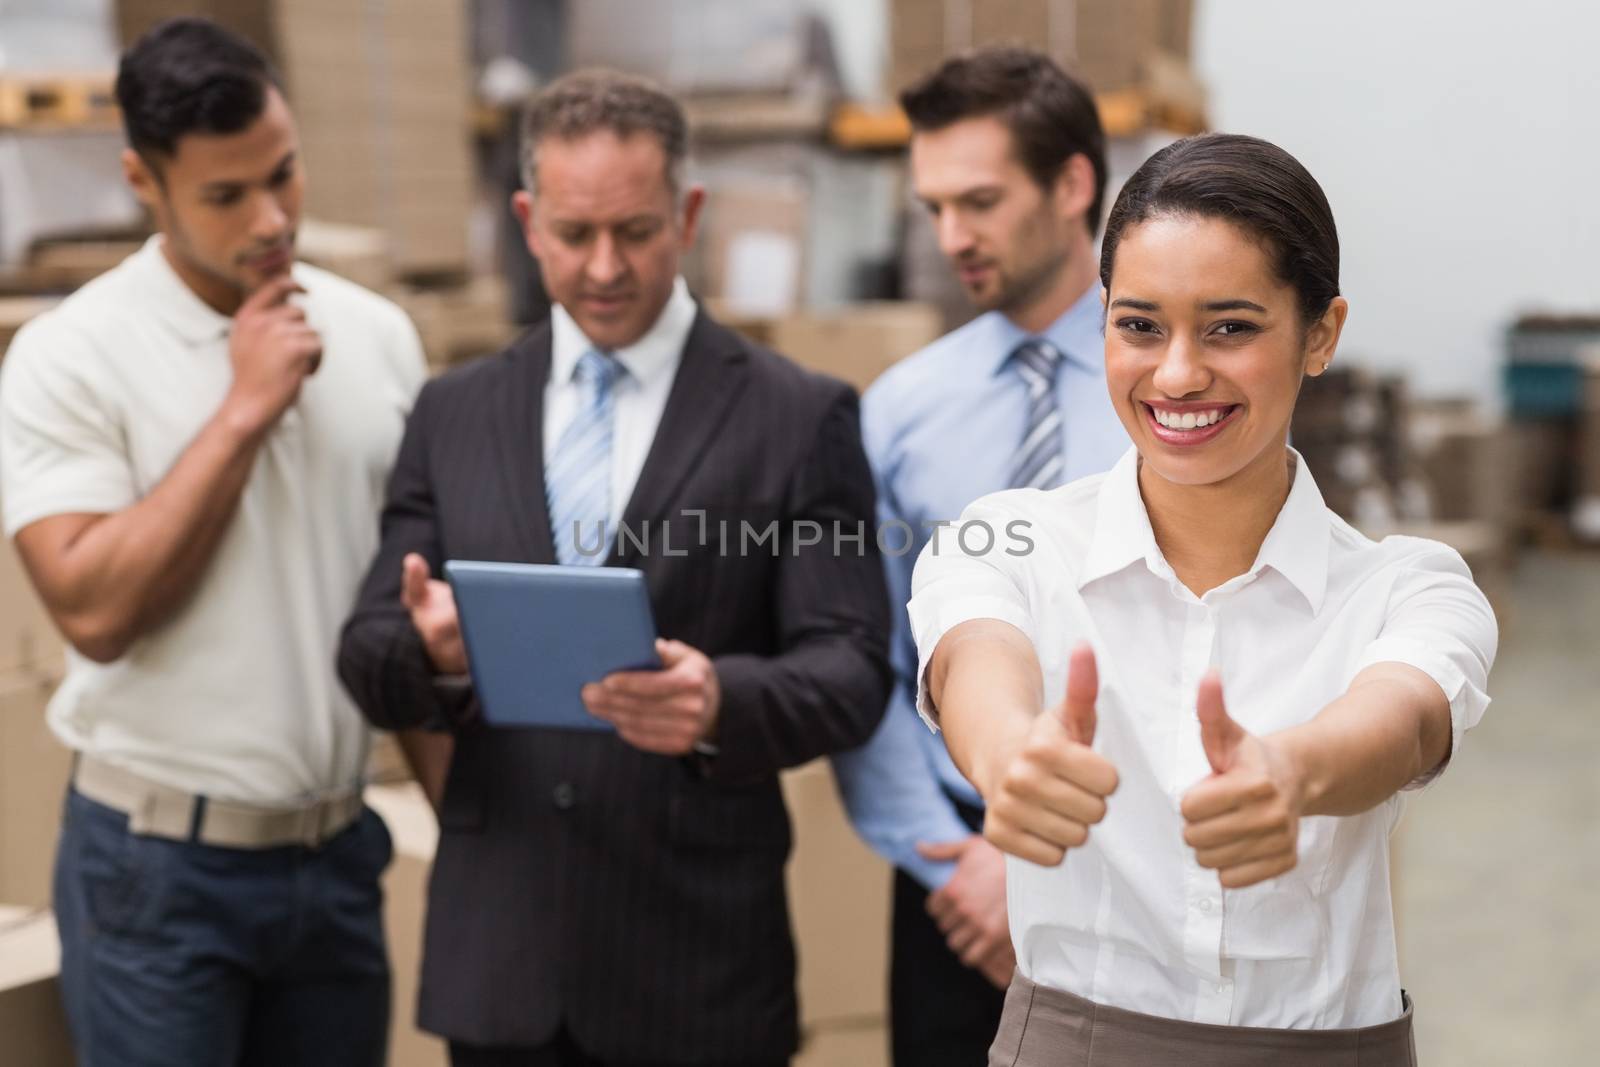 Manager showing thumbs up in front of her colleagues in a large warehouse